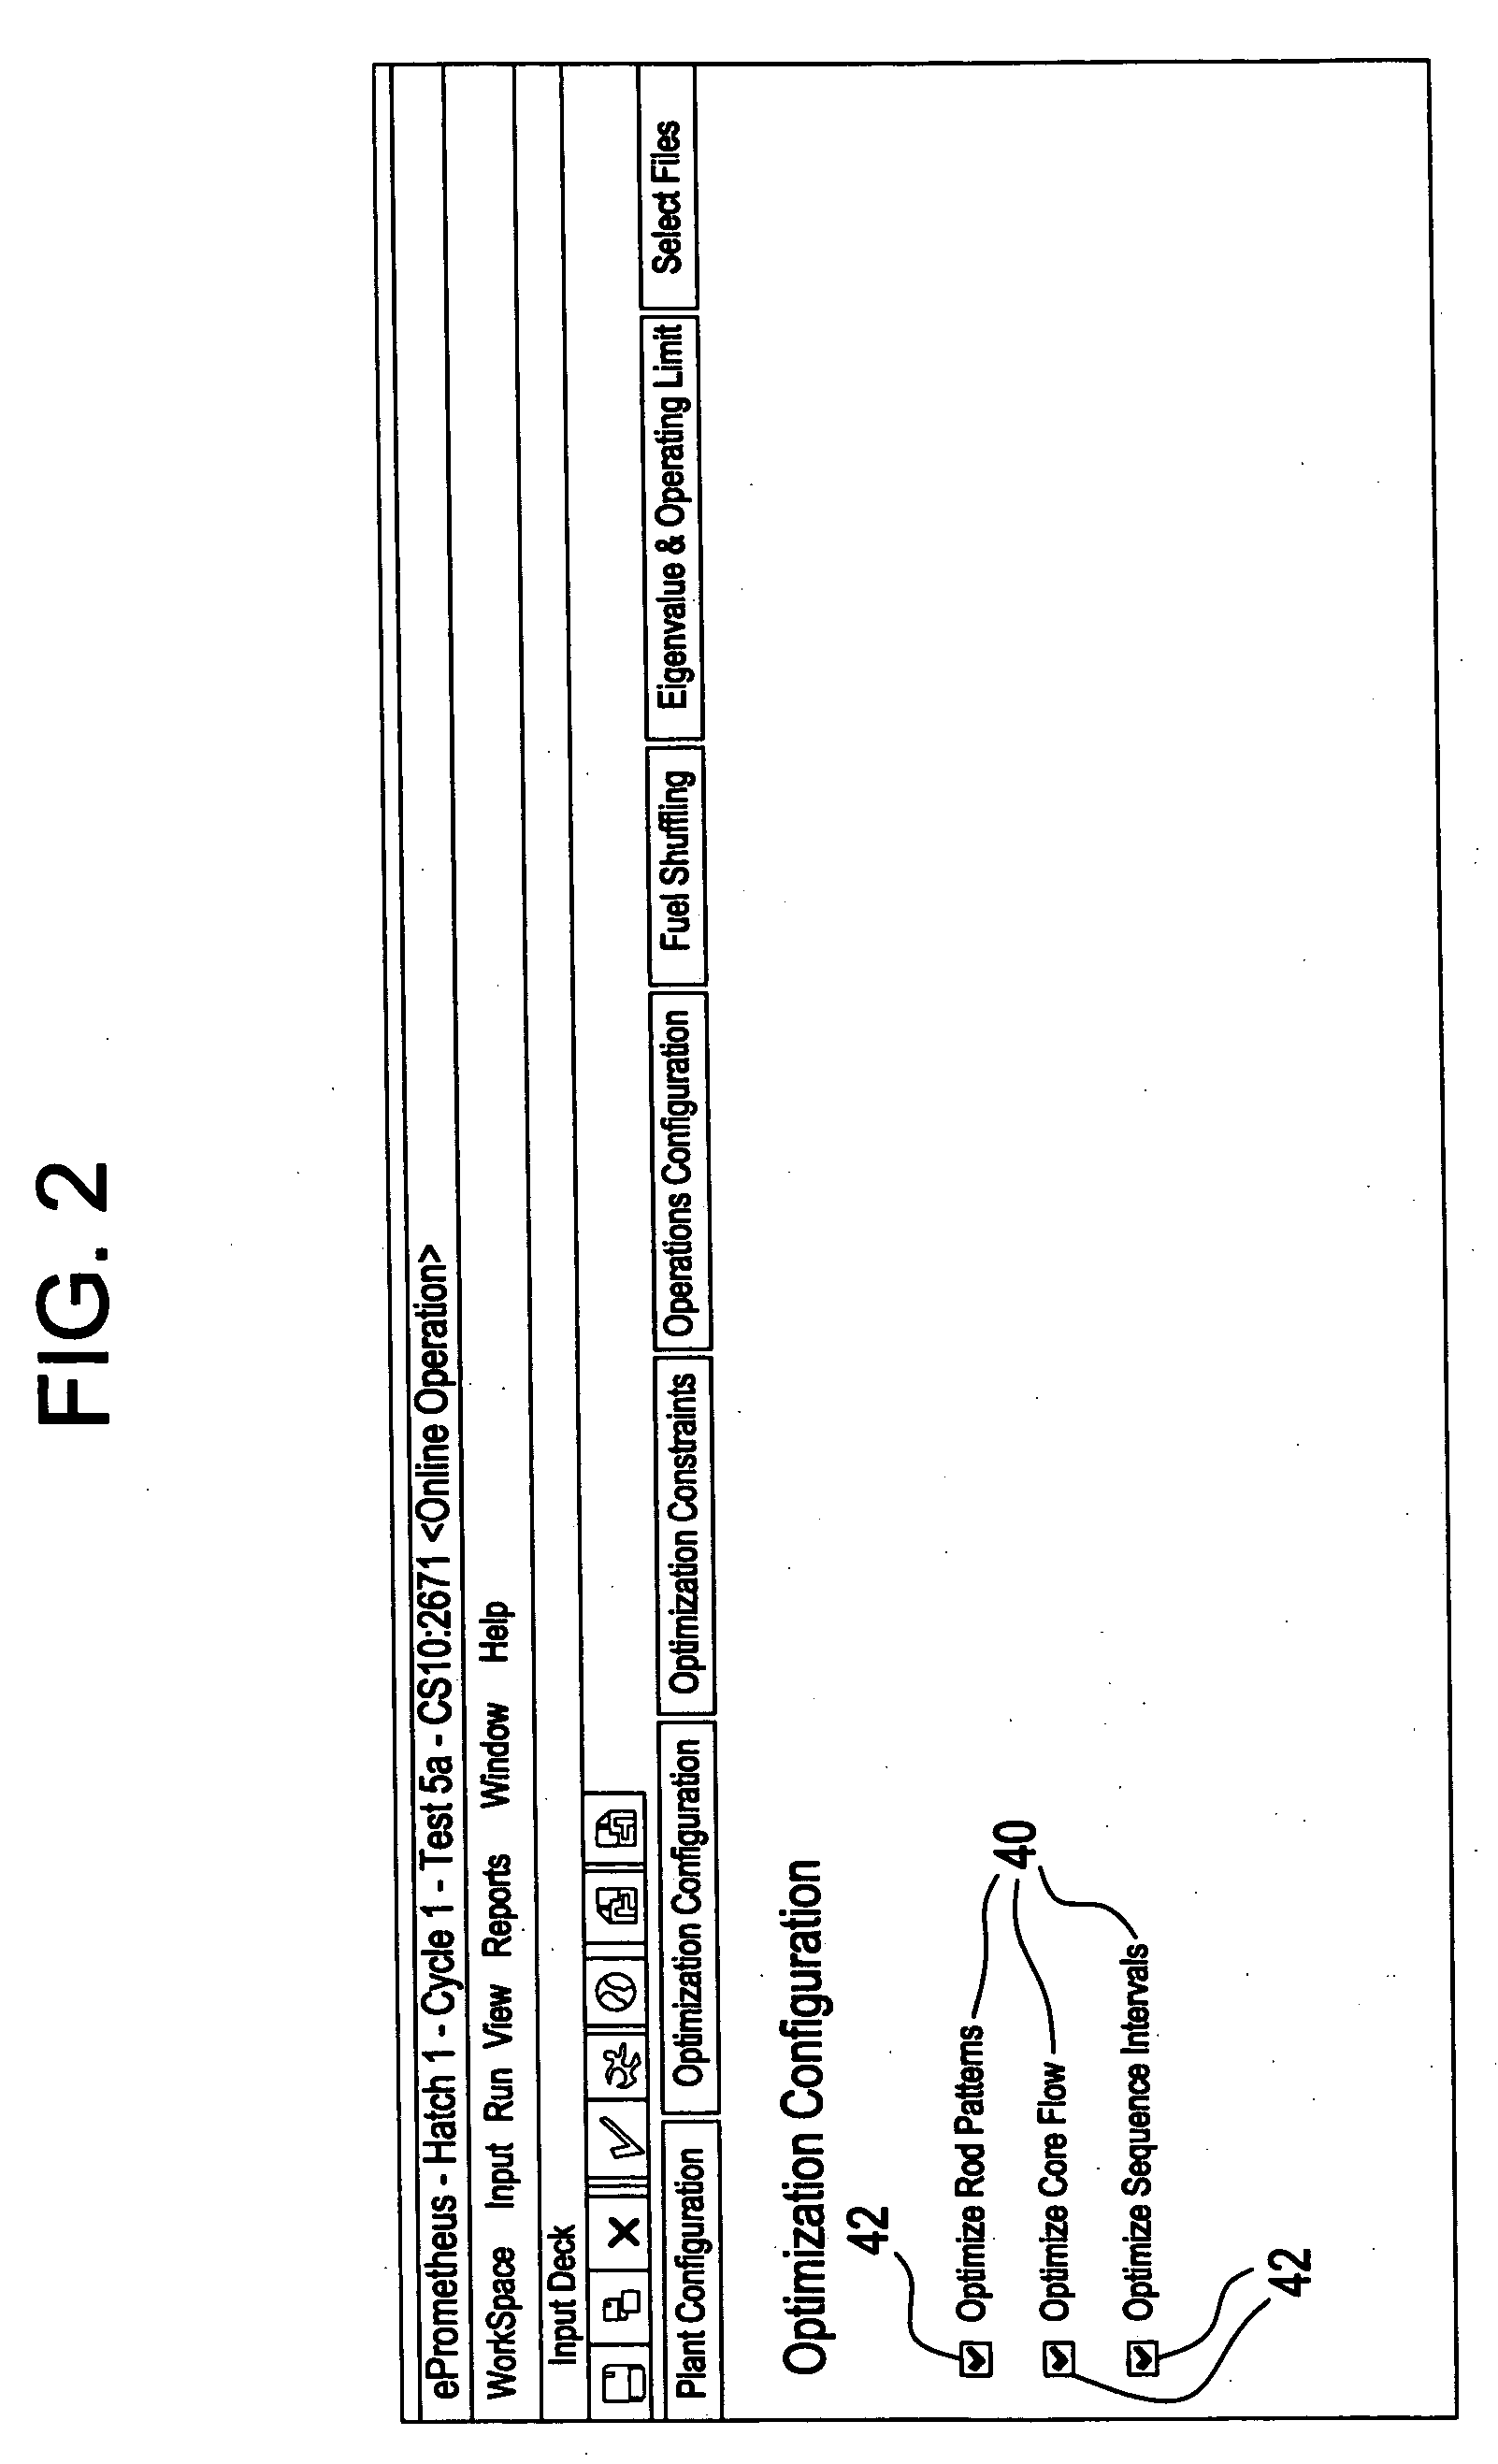 Method and apparatus for evaluating a proposed solution to a constraint problem